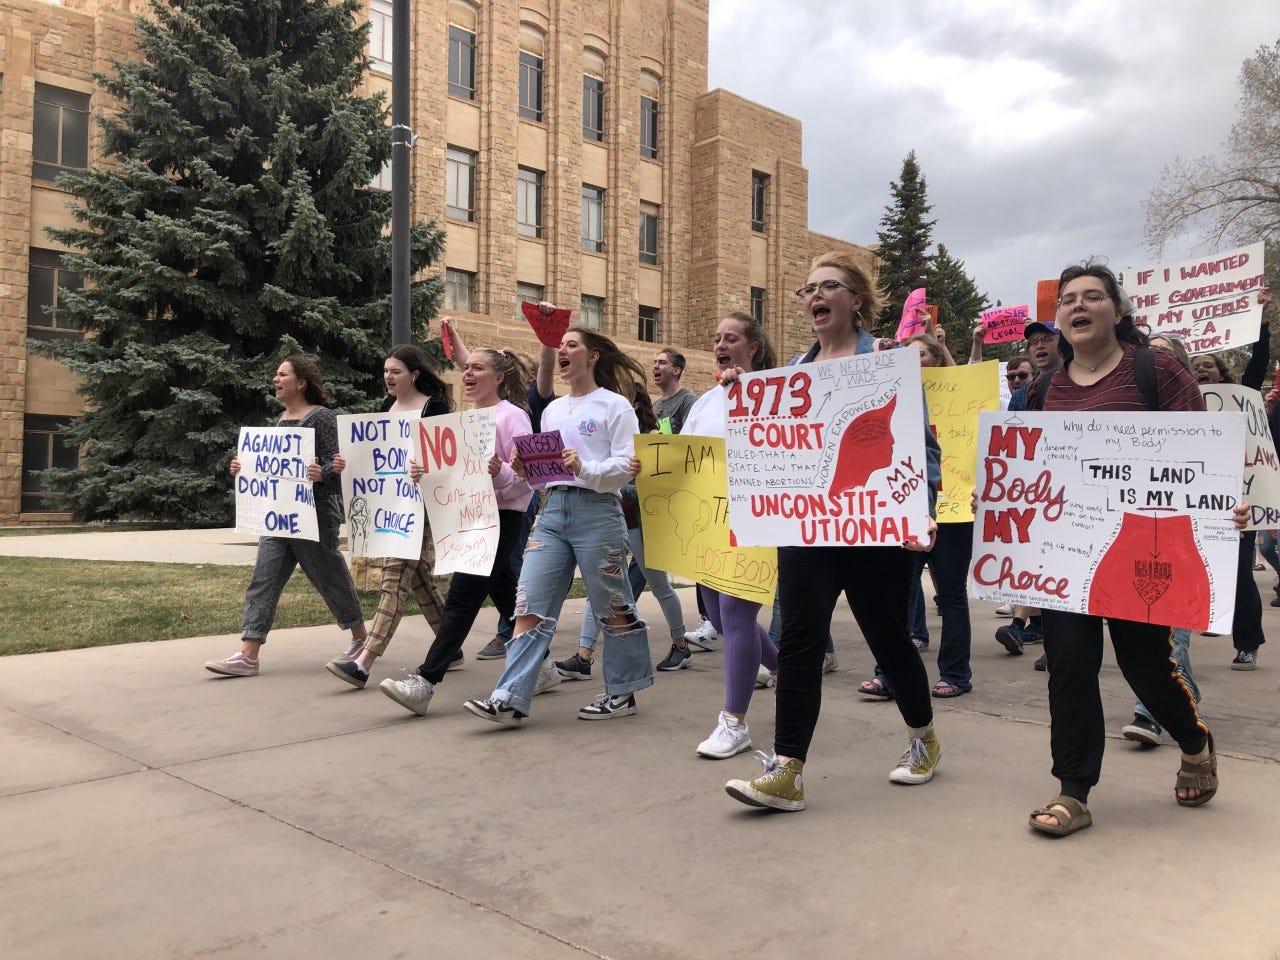 On a gray, cloudy day, protesters, mainly young women march in the foreground bearing pro-abortion rights signs, in front of the sandstone buildings of the University of Wyoming campus.